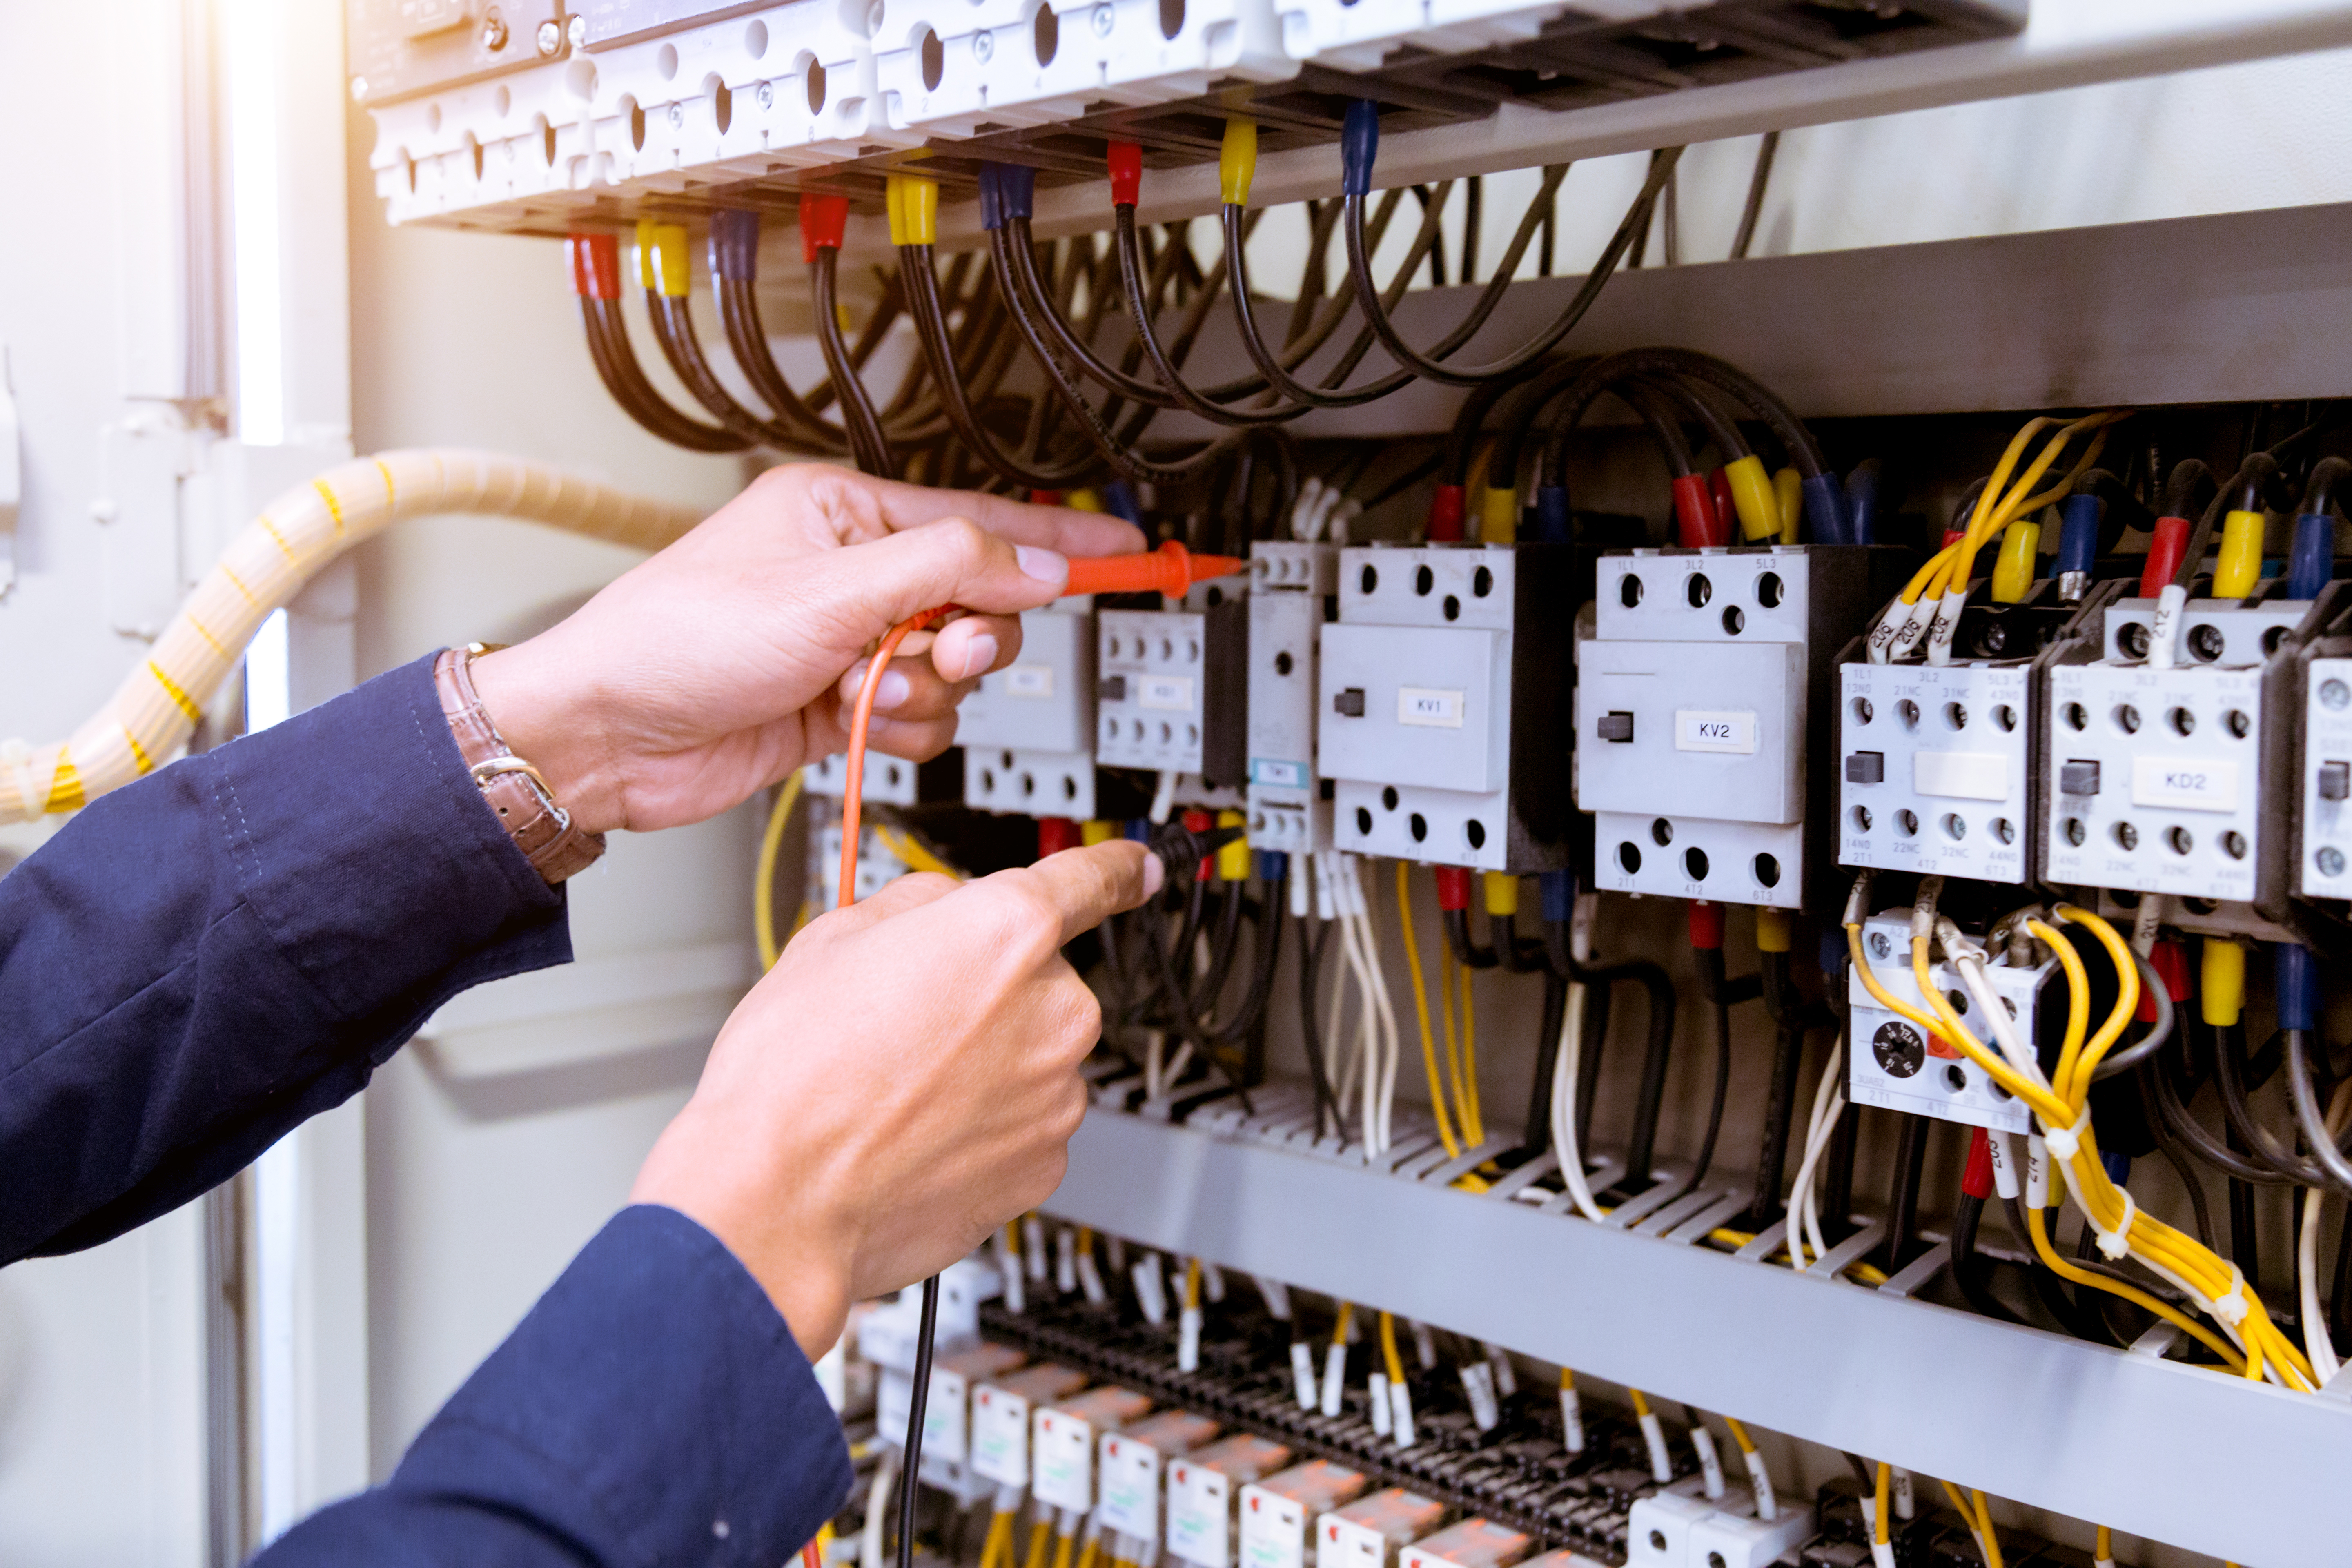 Axxa Ltd: Electrical Project Management, Specification and Supply Company